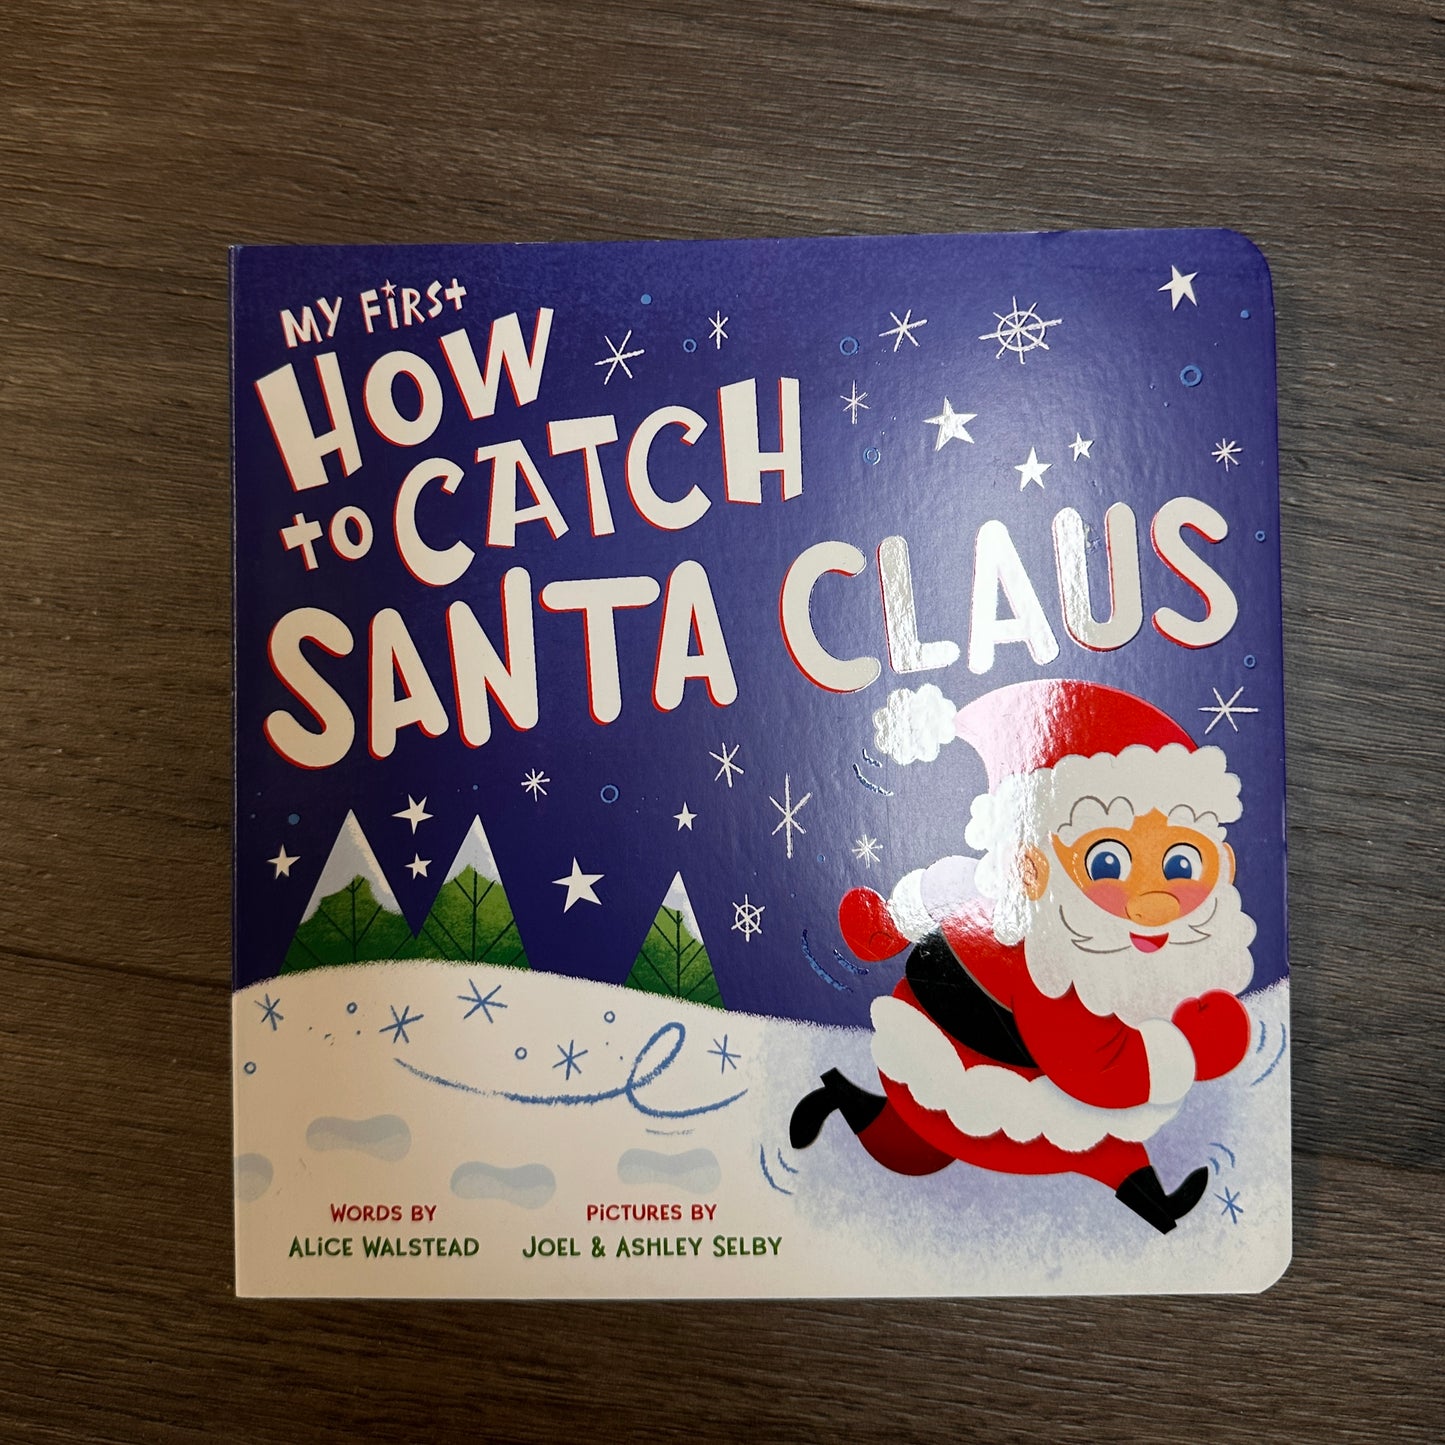 Book : My first How to Catch Santa Clause